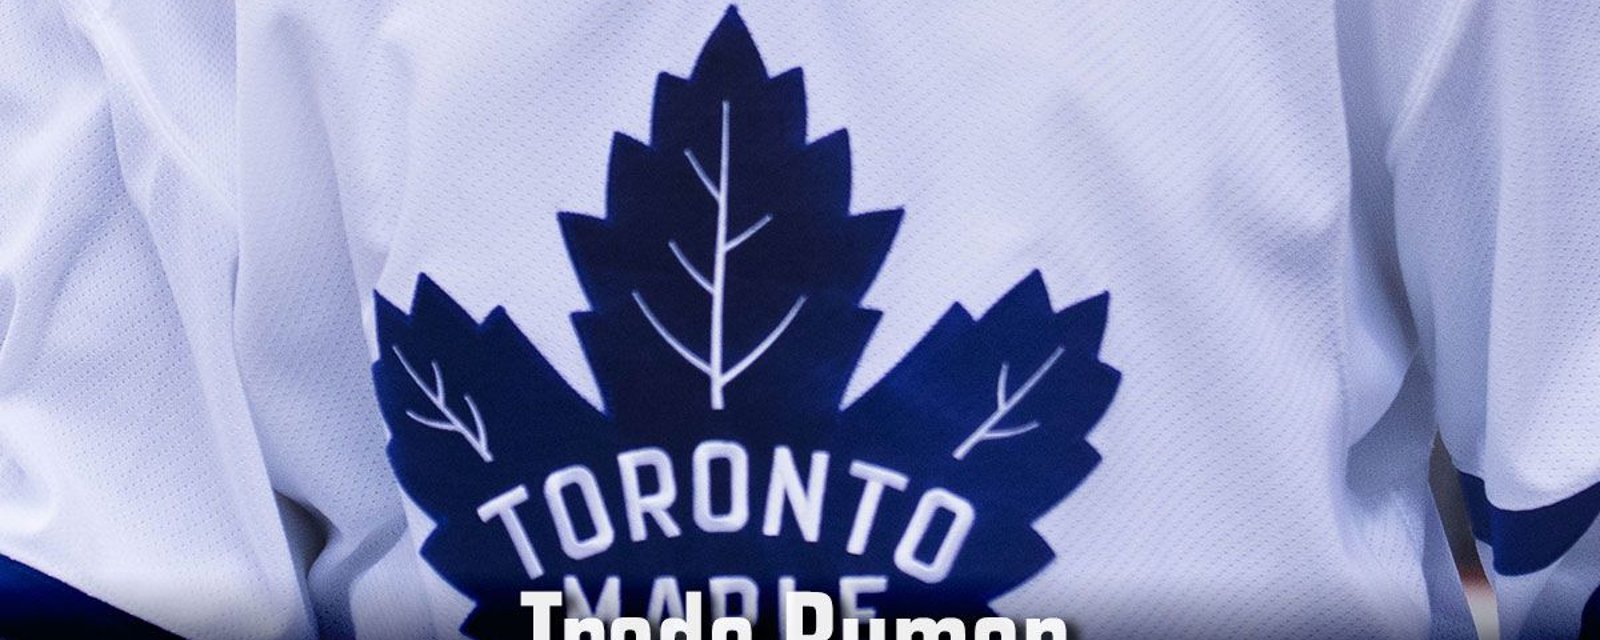 Leafs assistant GM + 2 scouts spotted, appears to confirm today's trade rumor.